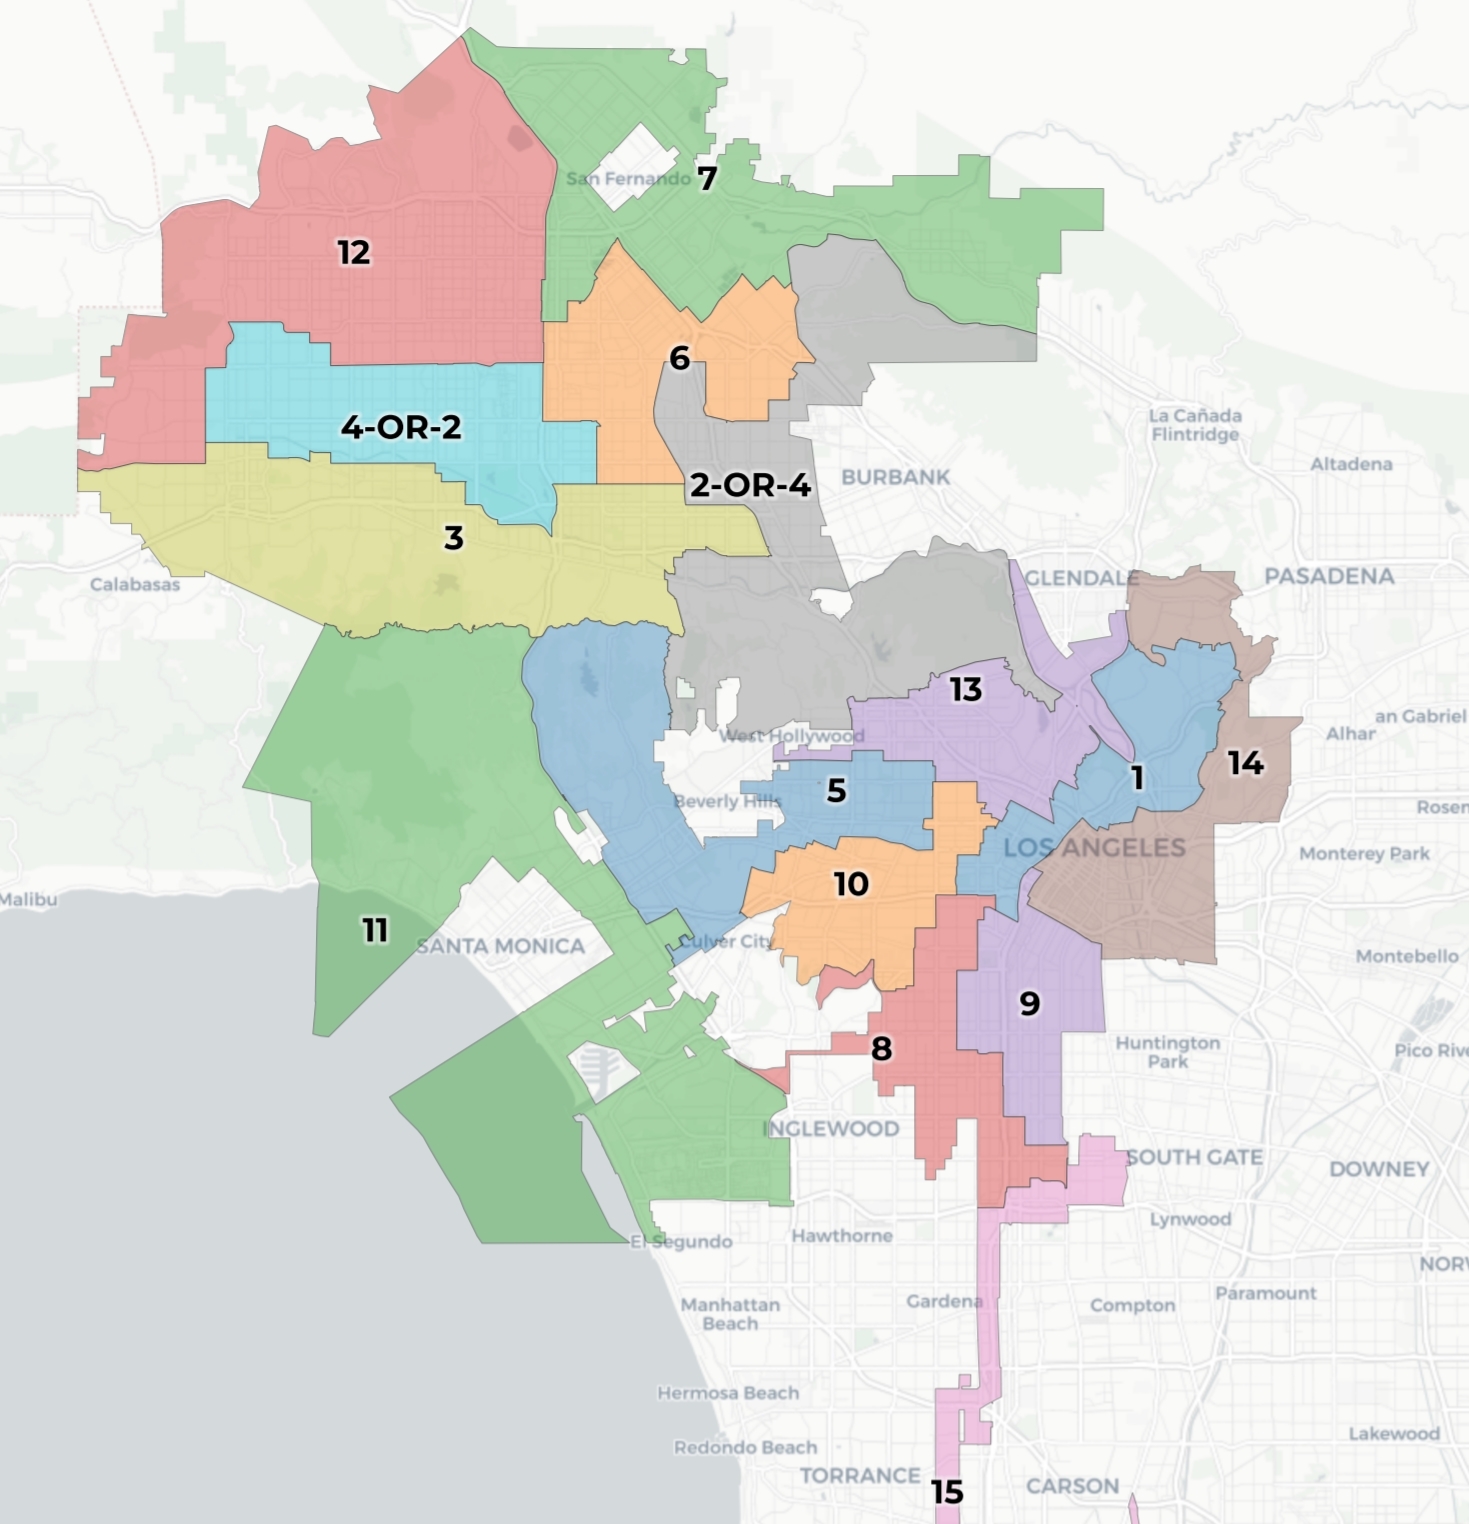 californiaglobe.com: LA City Council Redistricting Commission Announces New District Boundary Approval, Angering Members